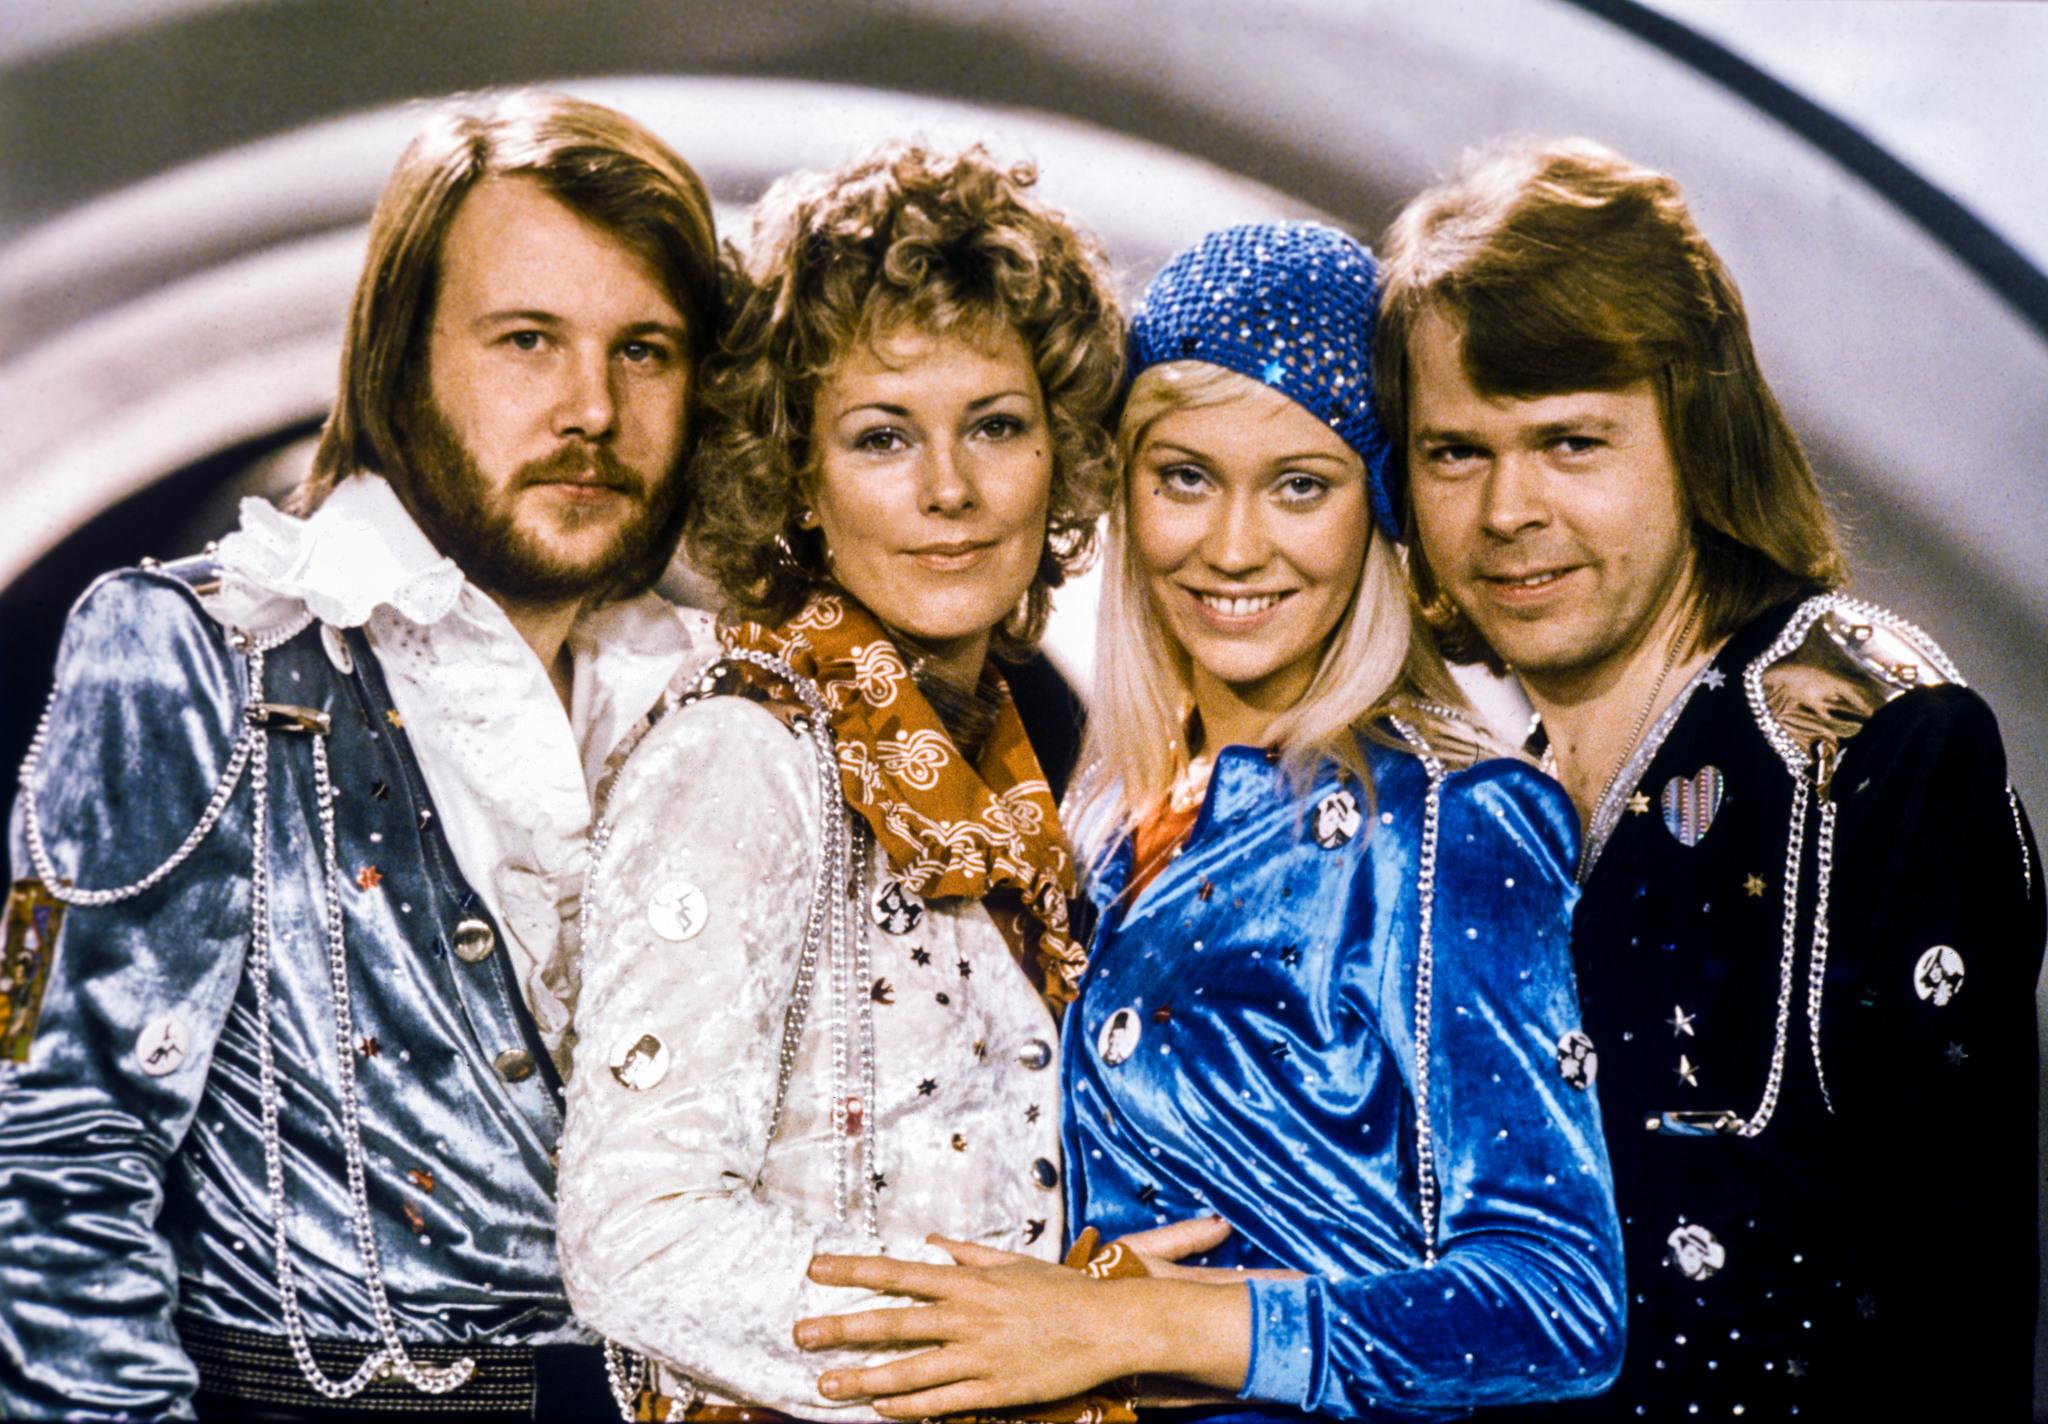 The four members of ABBA posing in their winning Eurovision outfits.